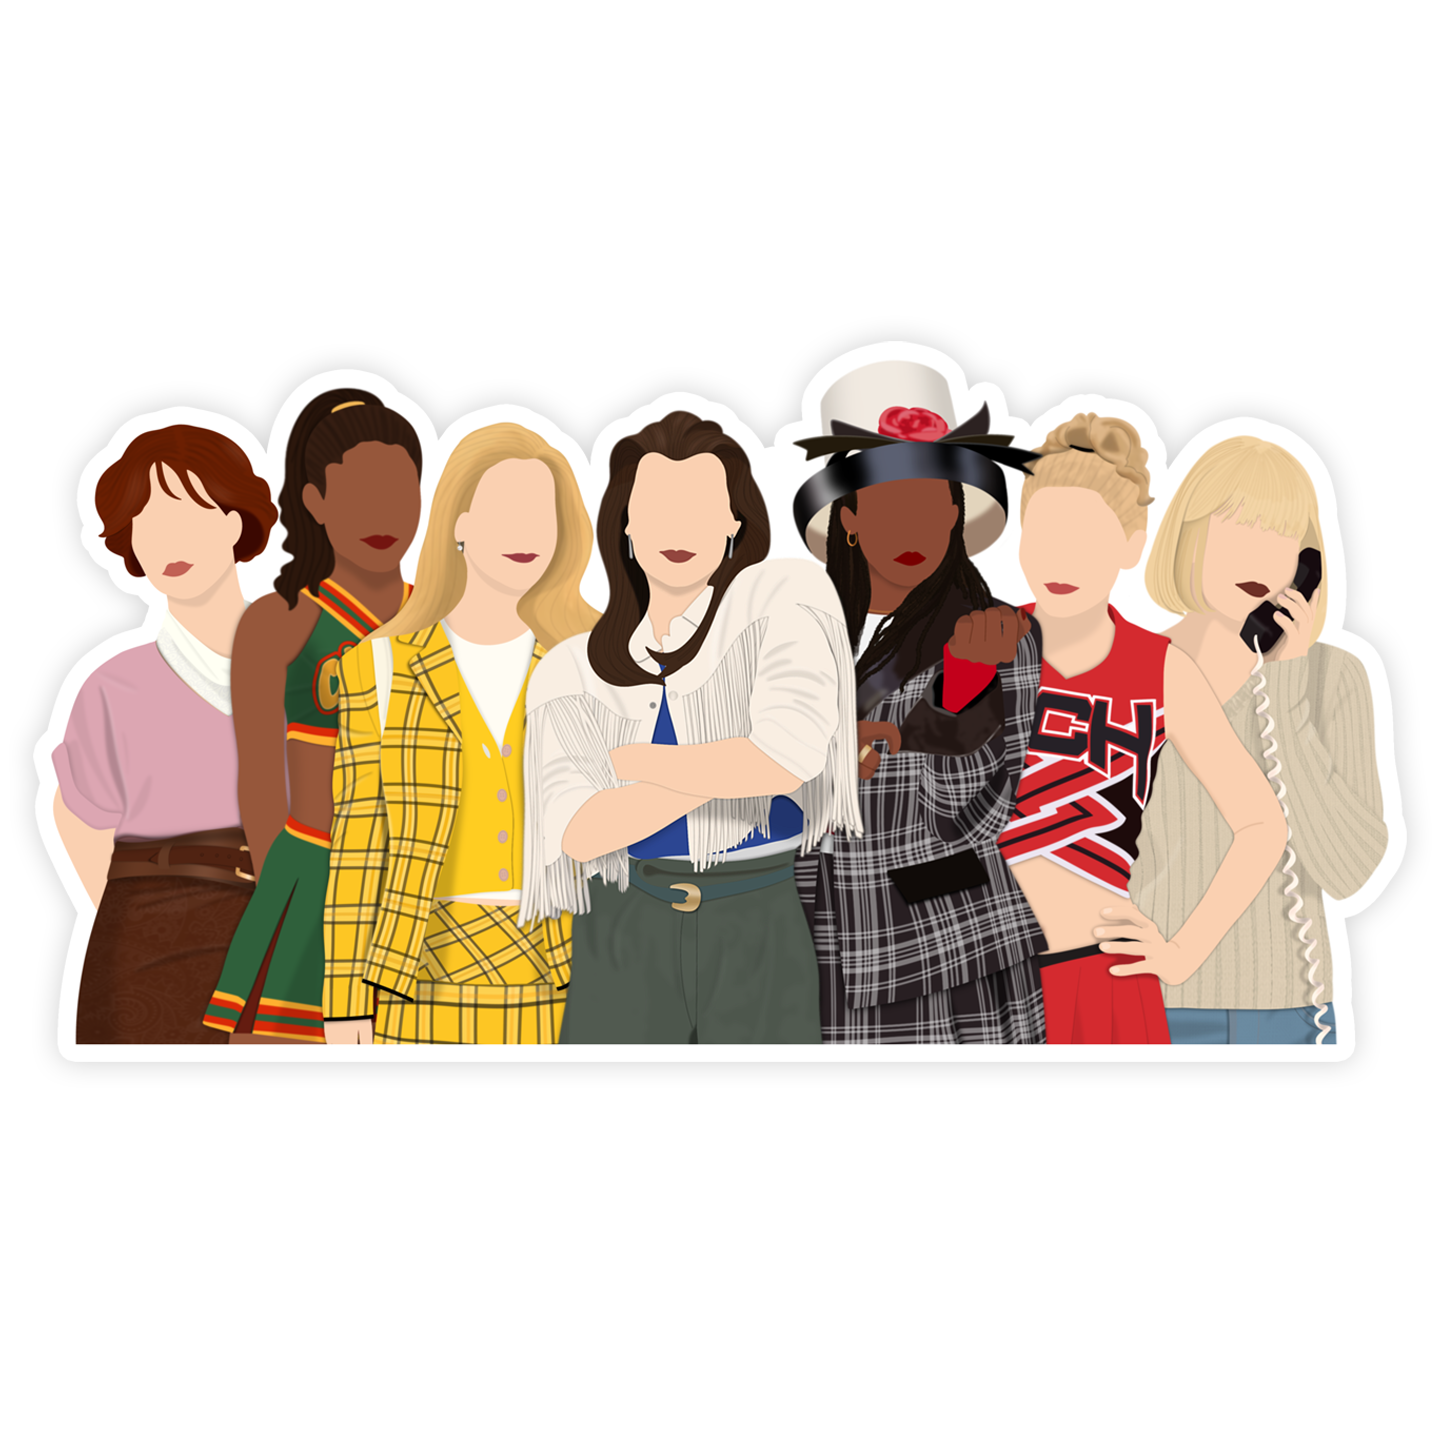 80's/90's Movie Icons Sticker - Clueless, Bring it On, etc